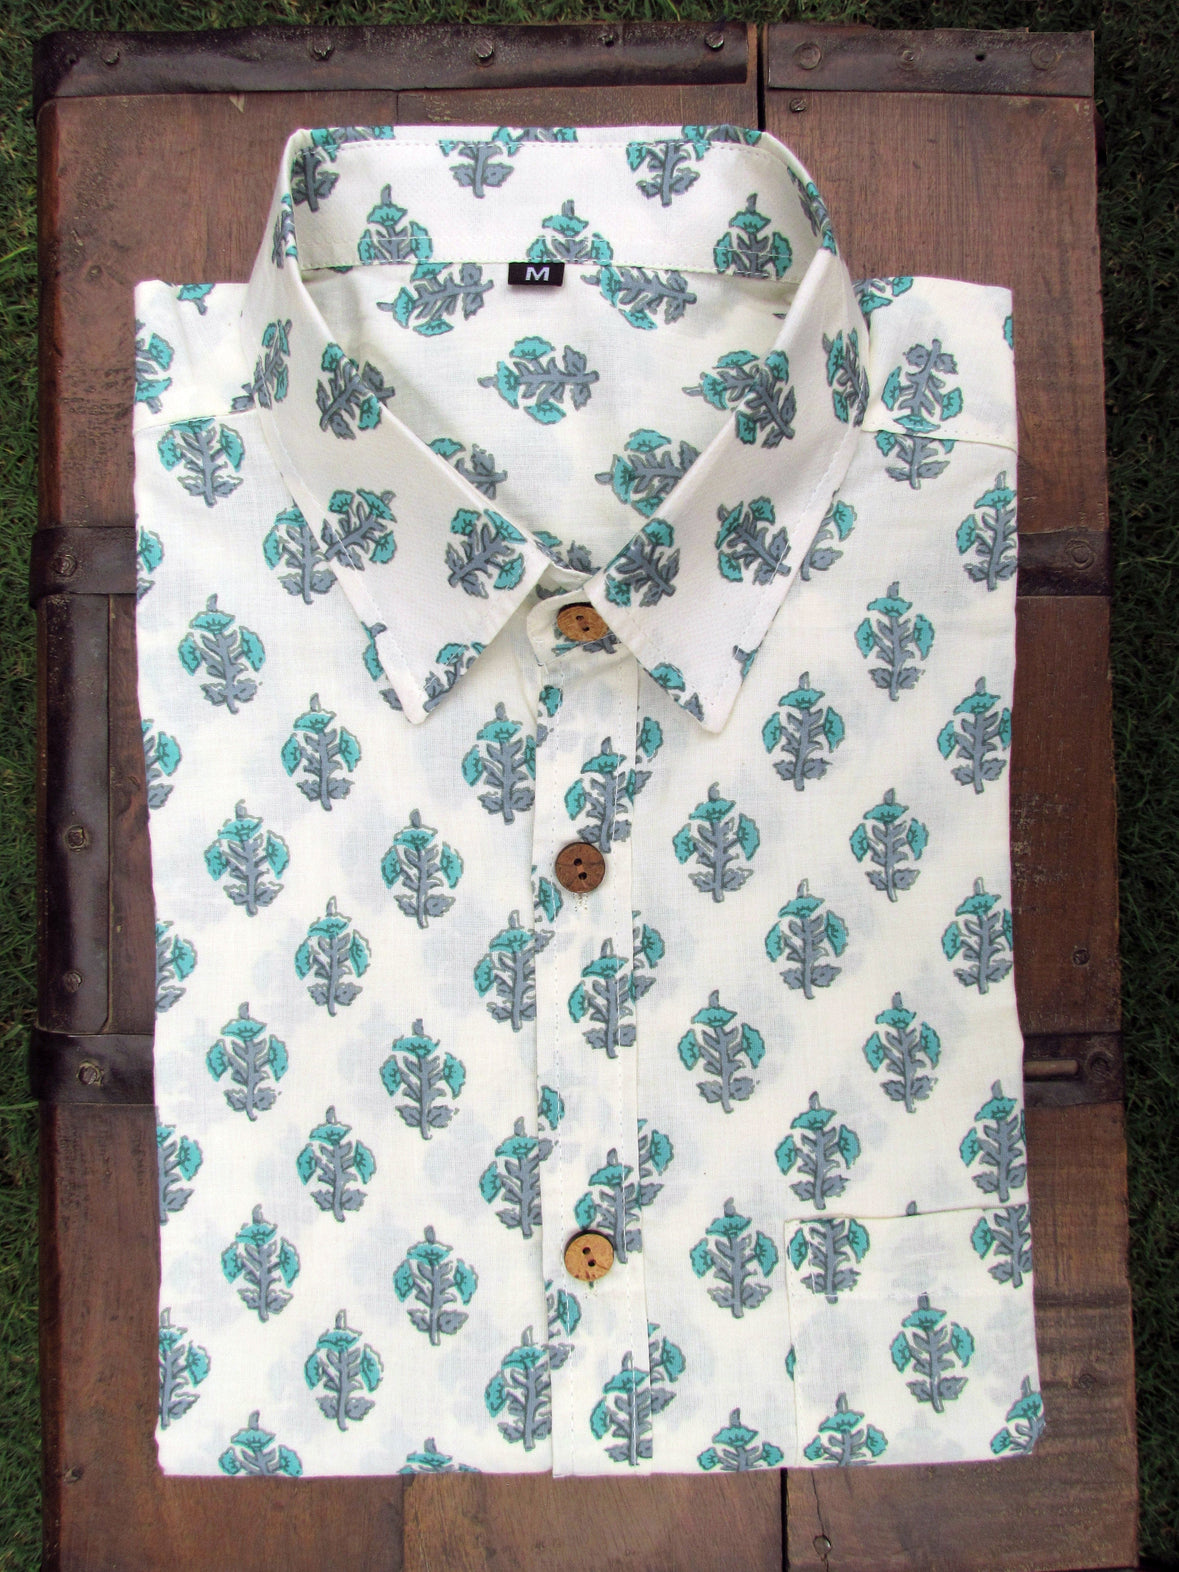 latest fashion designer pure cotton handblock shirts for men handmade in india online shopping floral pattern in green and white boota